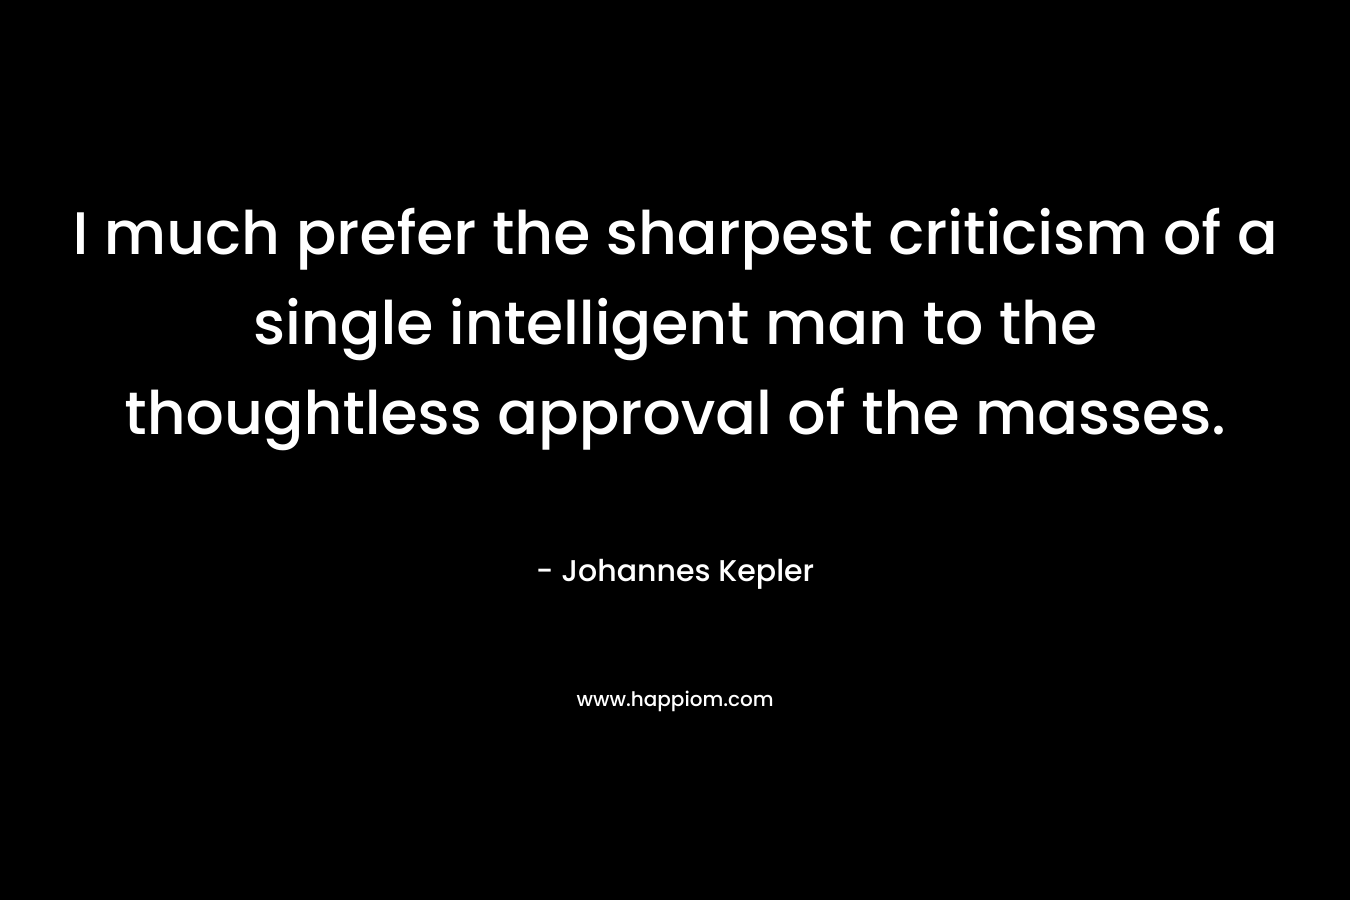 I much prefer the sharpest criticism of a single intelligent man to the thoughtless approval of the masses. – Johannes Kepler